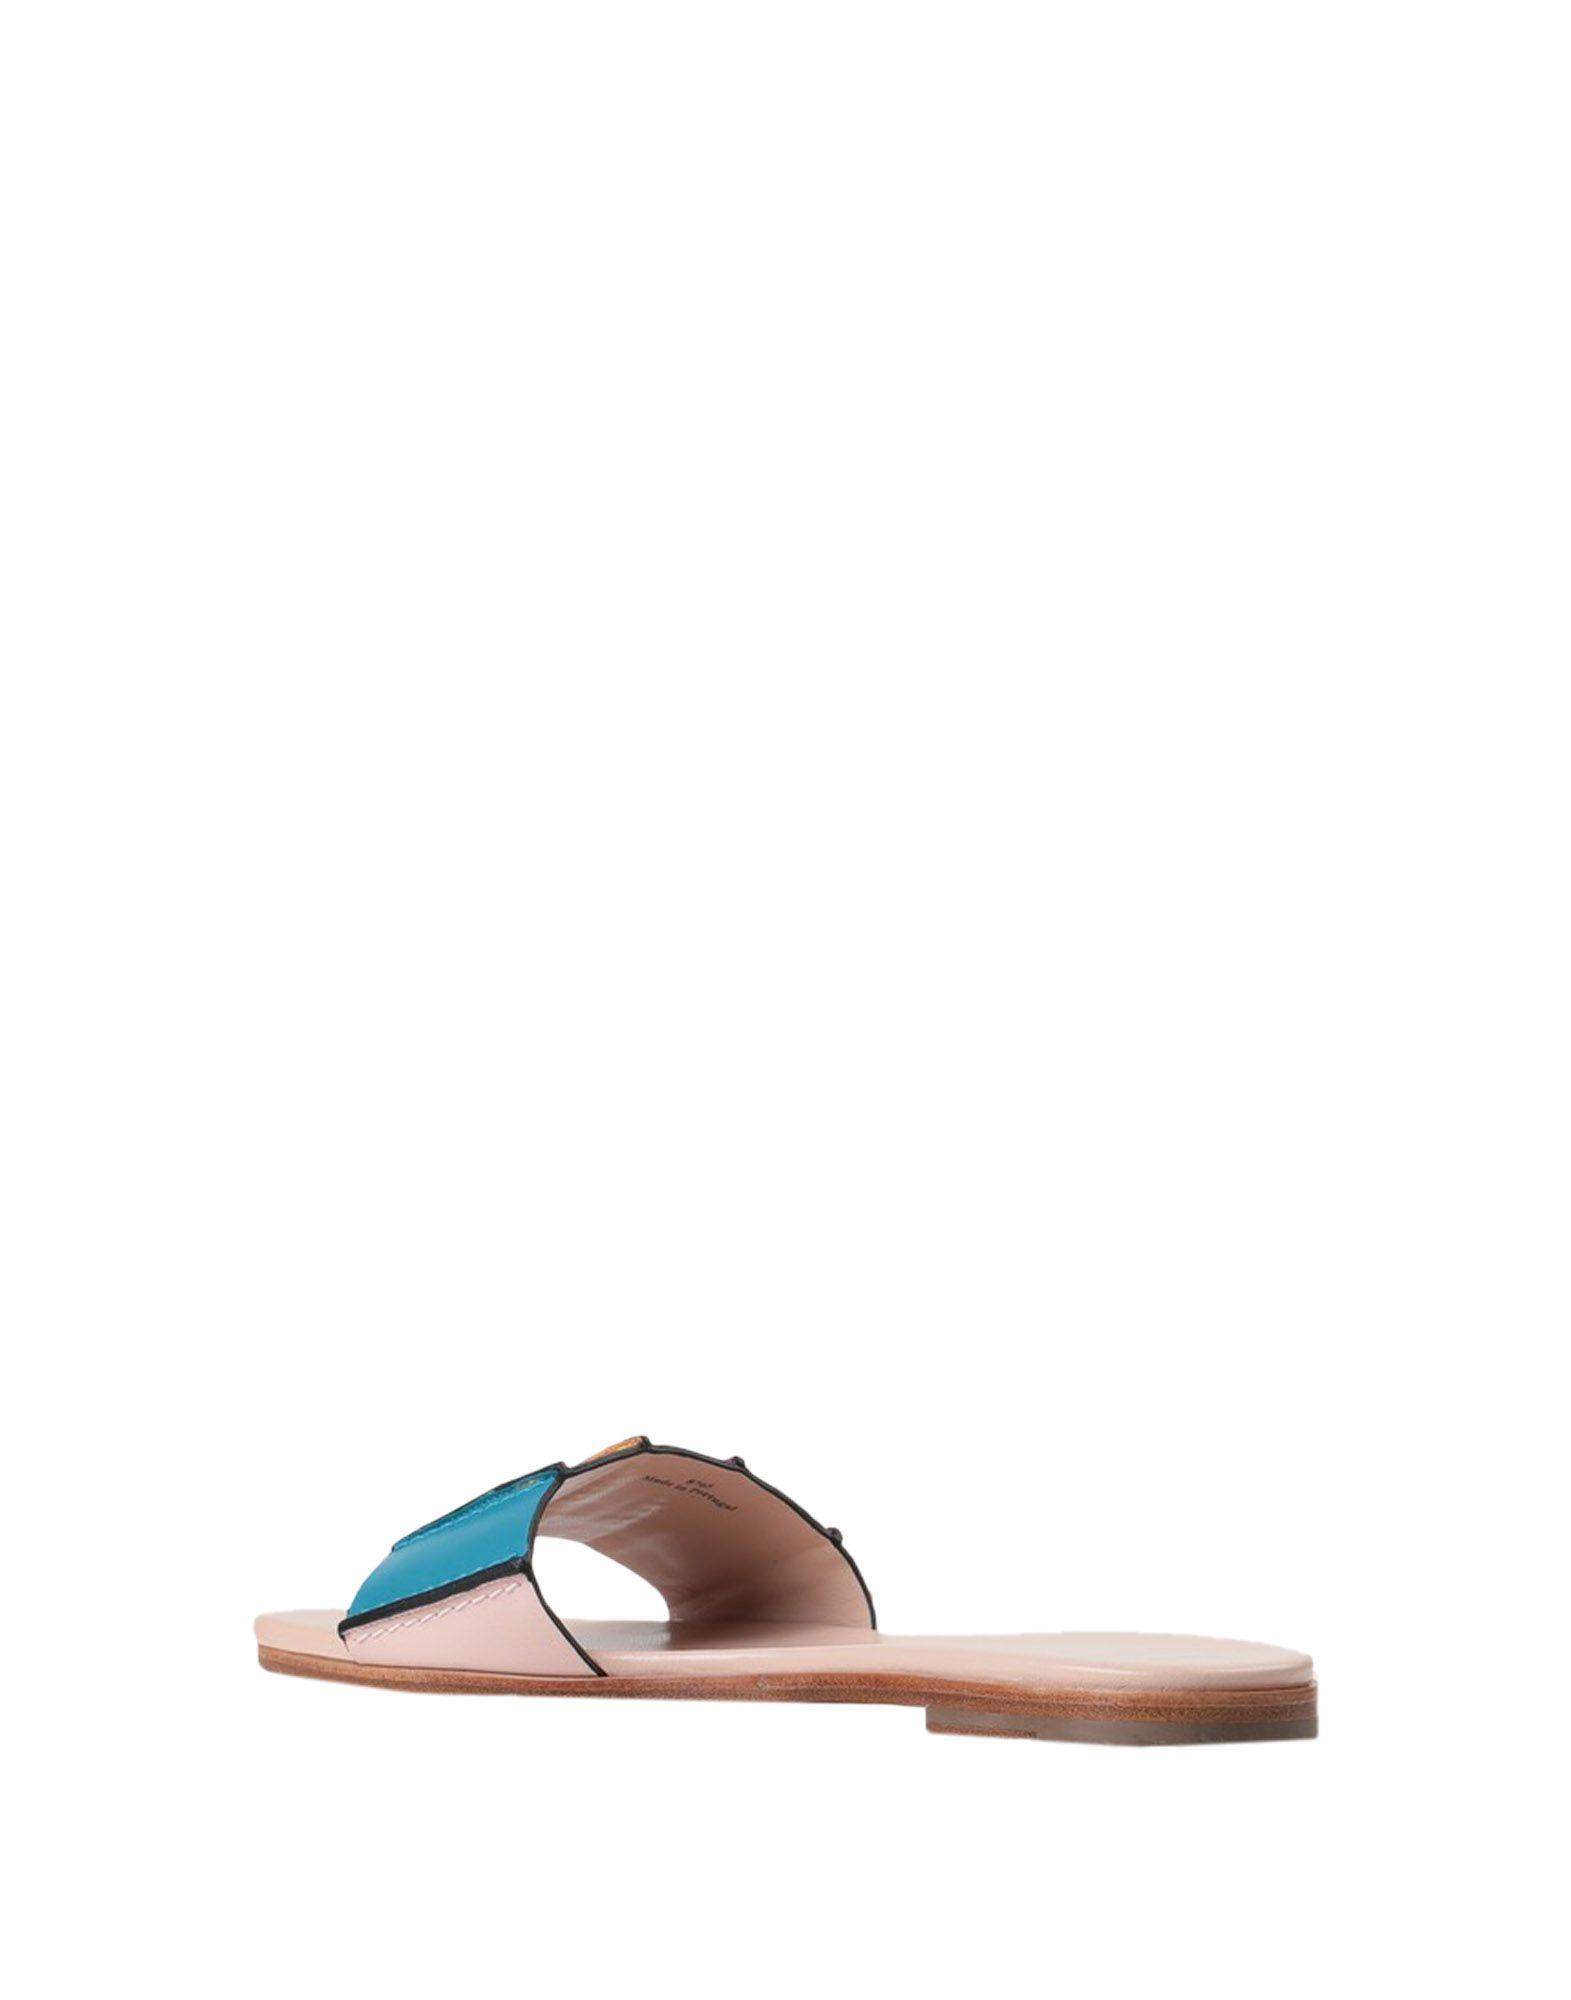 Paul Smith Leather Sandals | Lyst